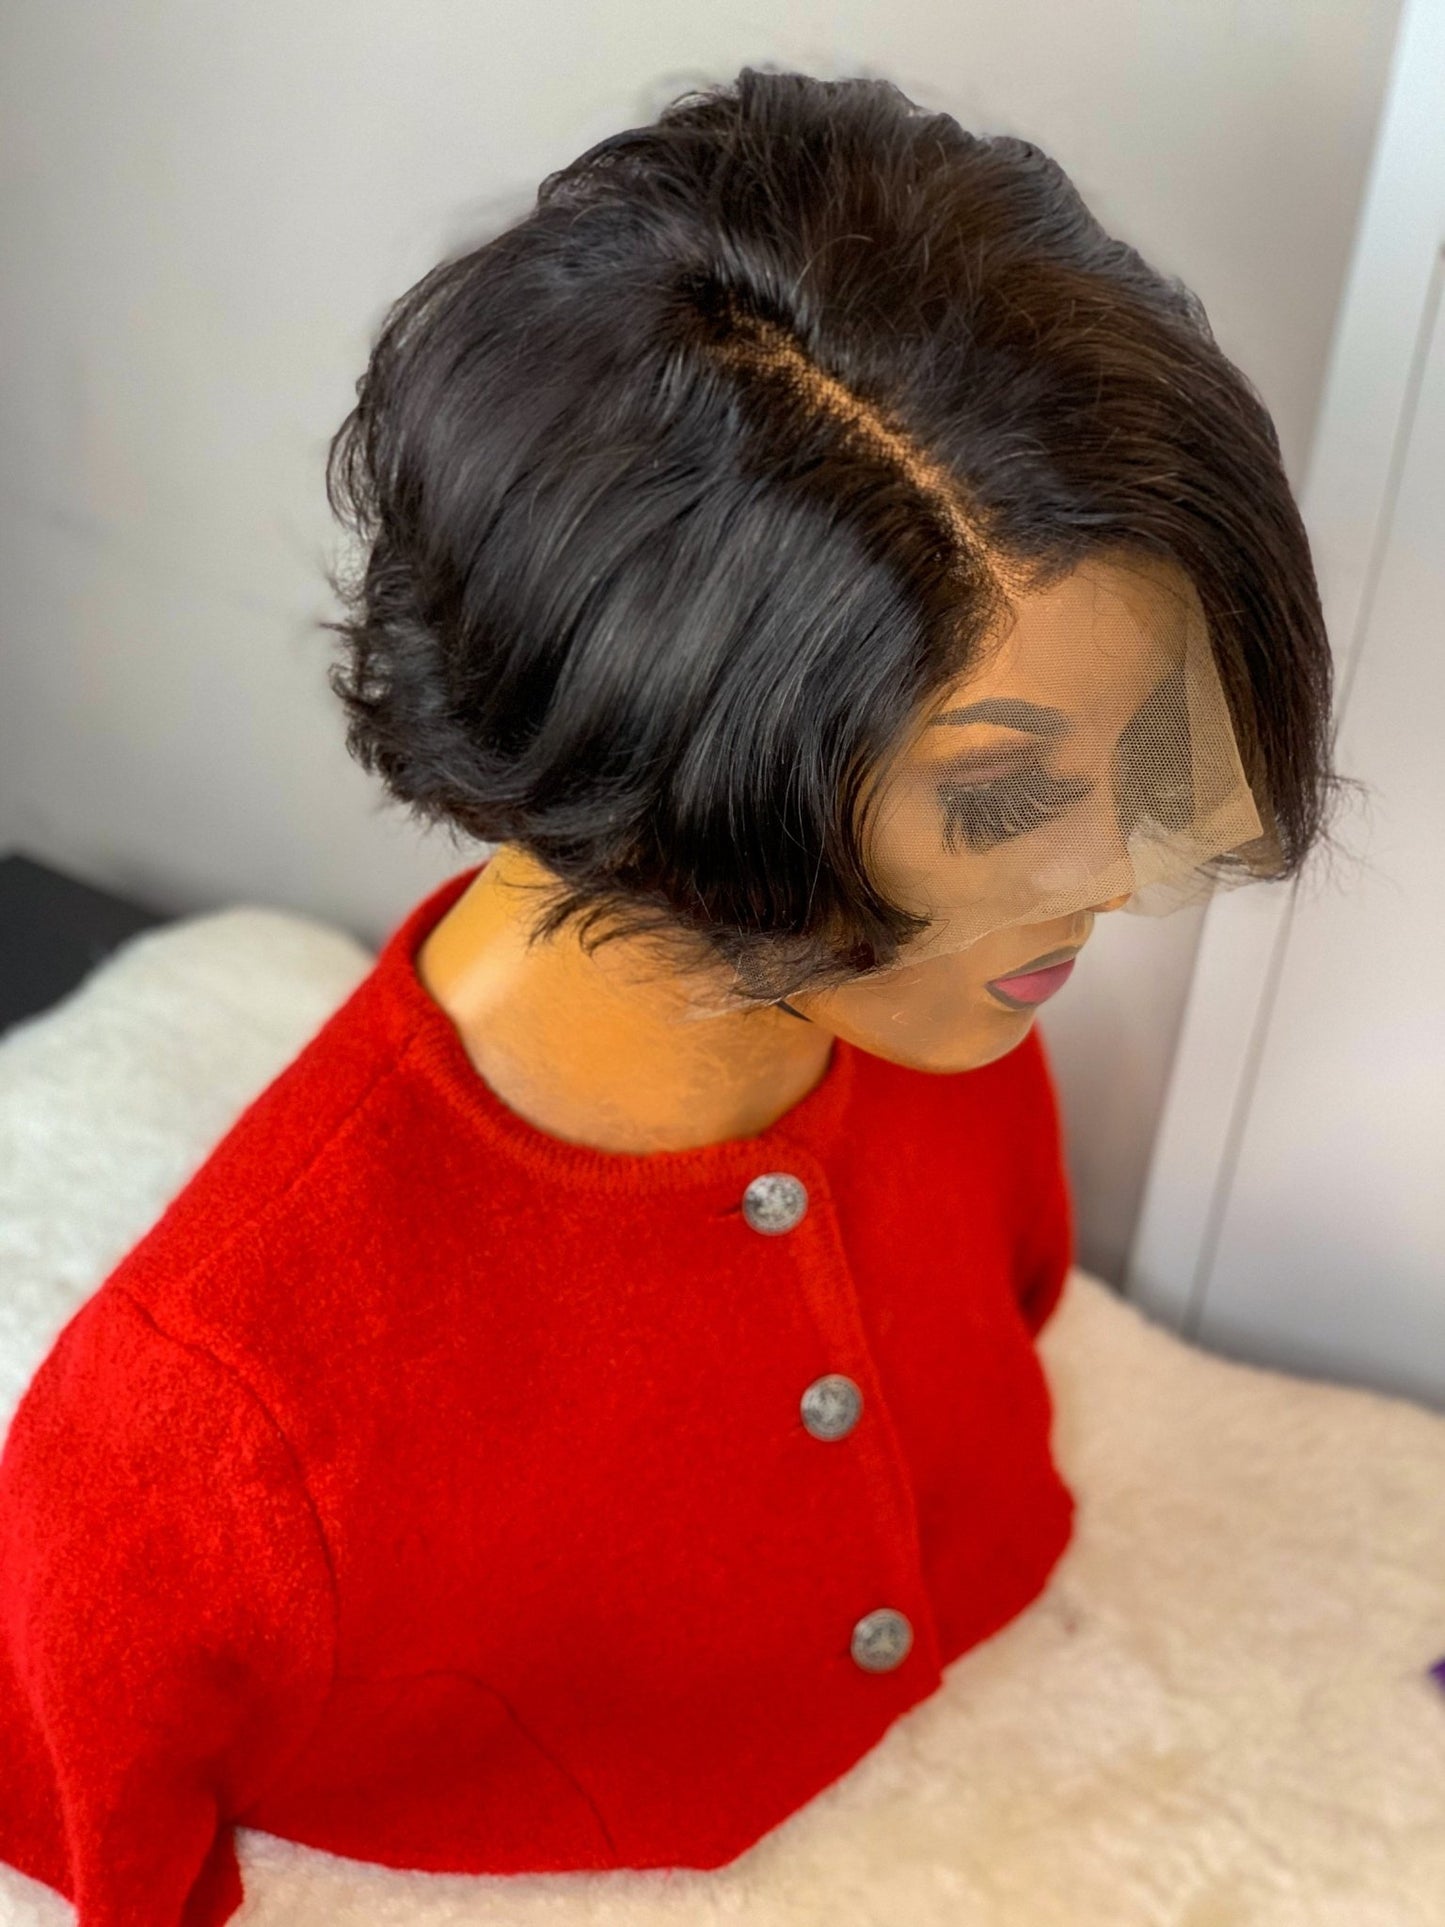 FAB PIXIE CUT LACE FRONTAL LUXURY WIG - Fab Beauty Supplies